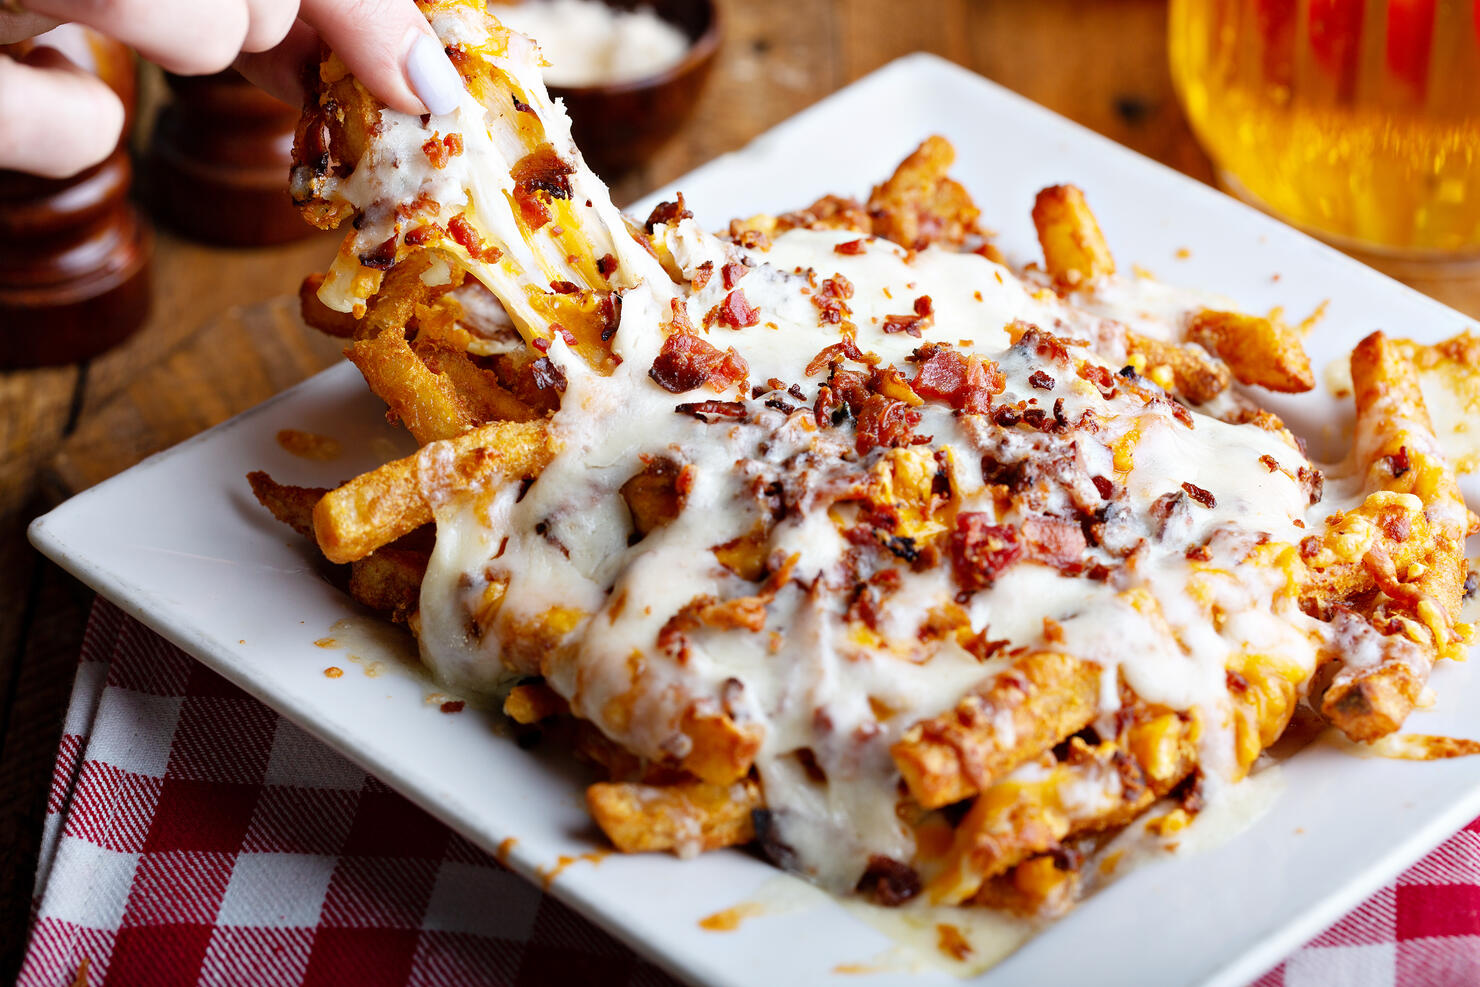 Cheese fries topped with bacon